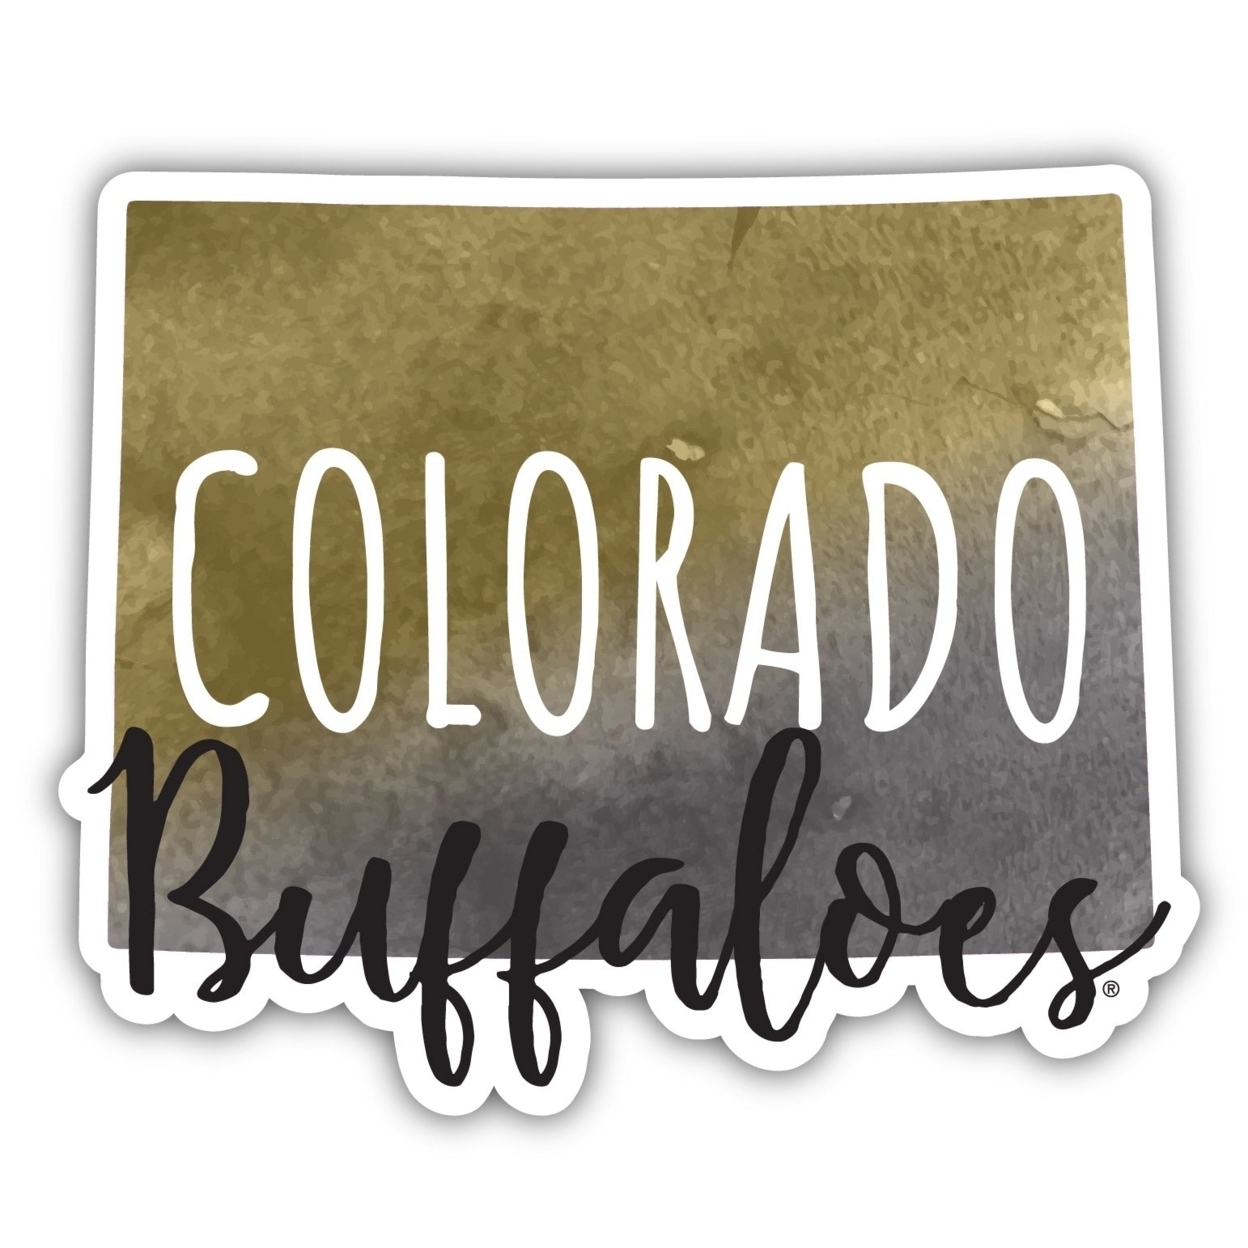 Colorado Buffaloes Watercolor State Die Cut Decal 4-Inch